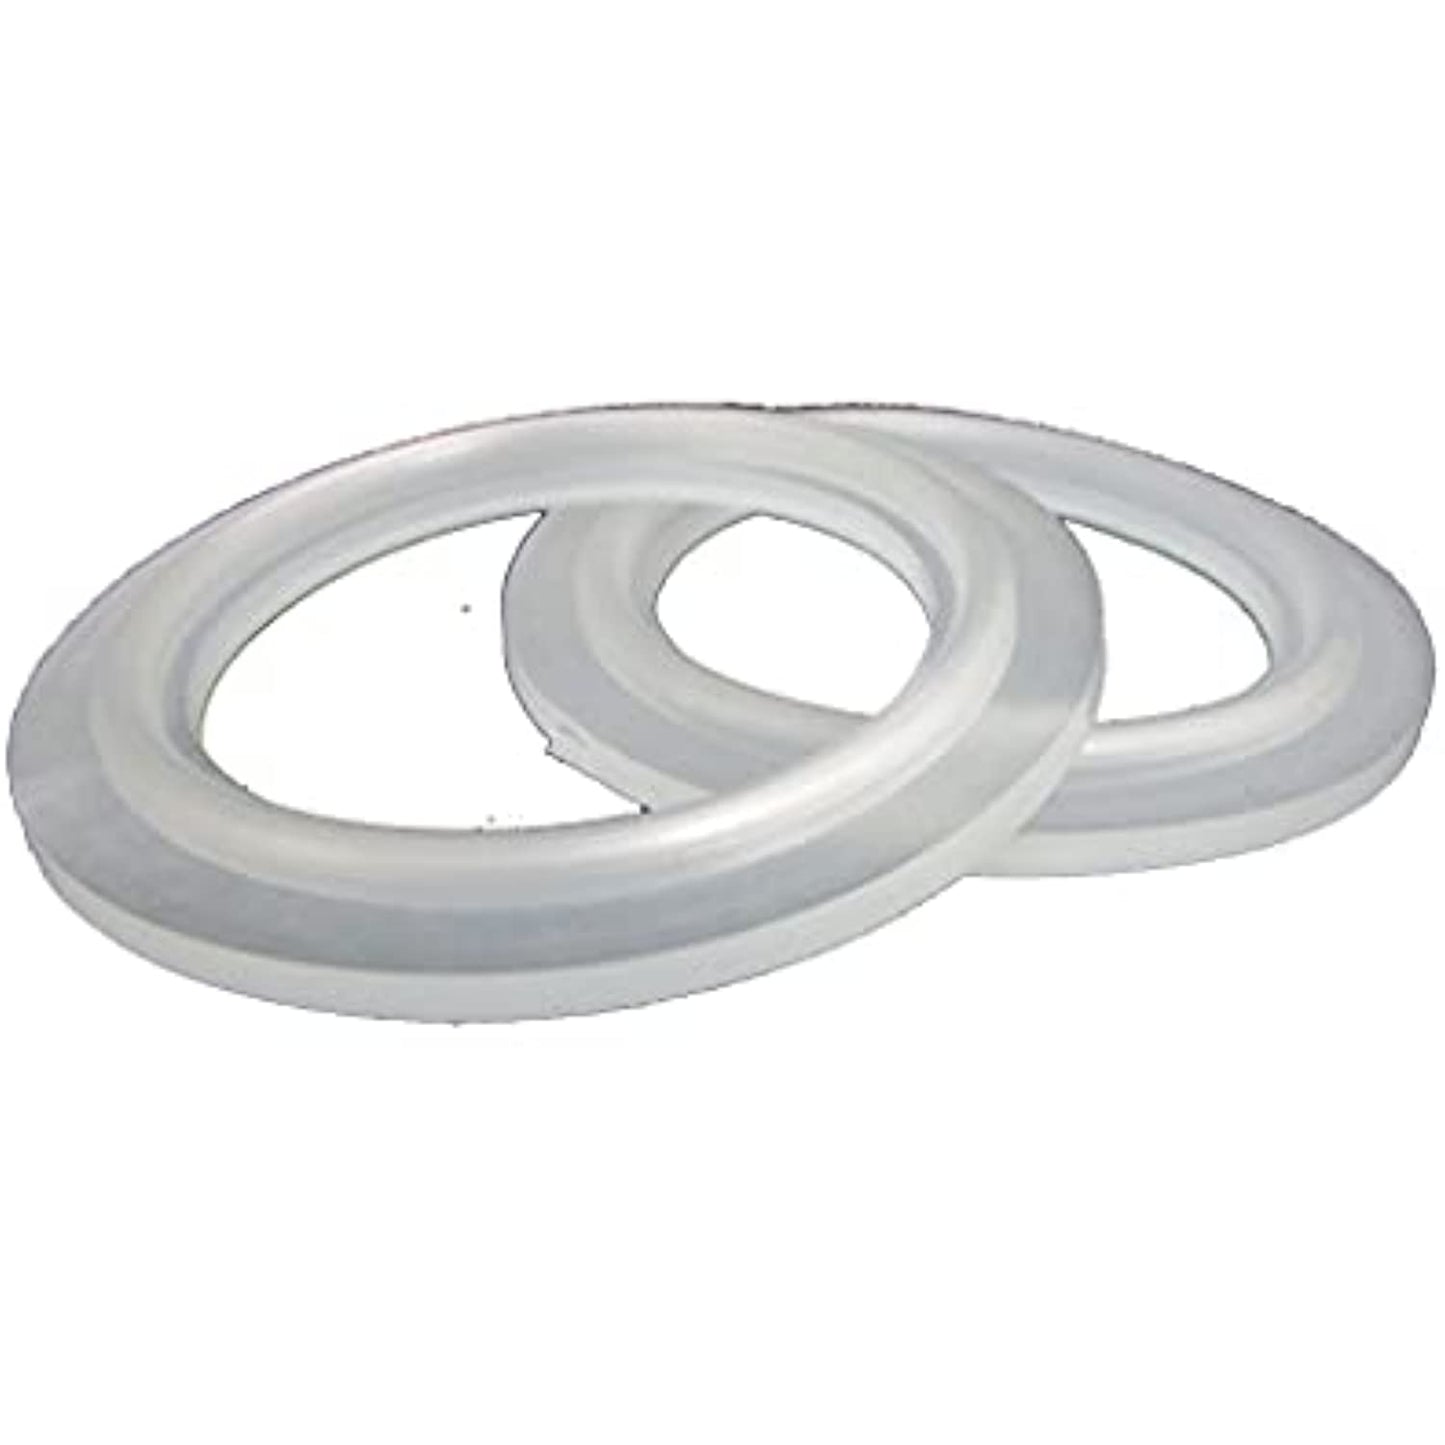 (x2) Waterway Plastics 711-4050 Ribbed O-Ring Gasket Used on 1½" Spa Heaters and Pump Unions